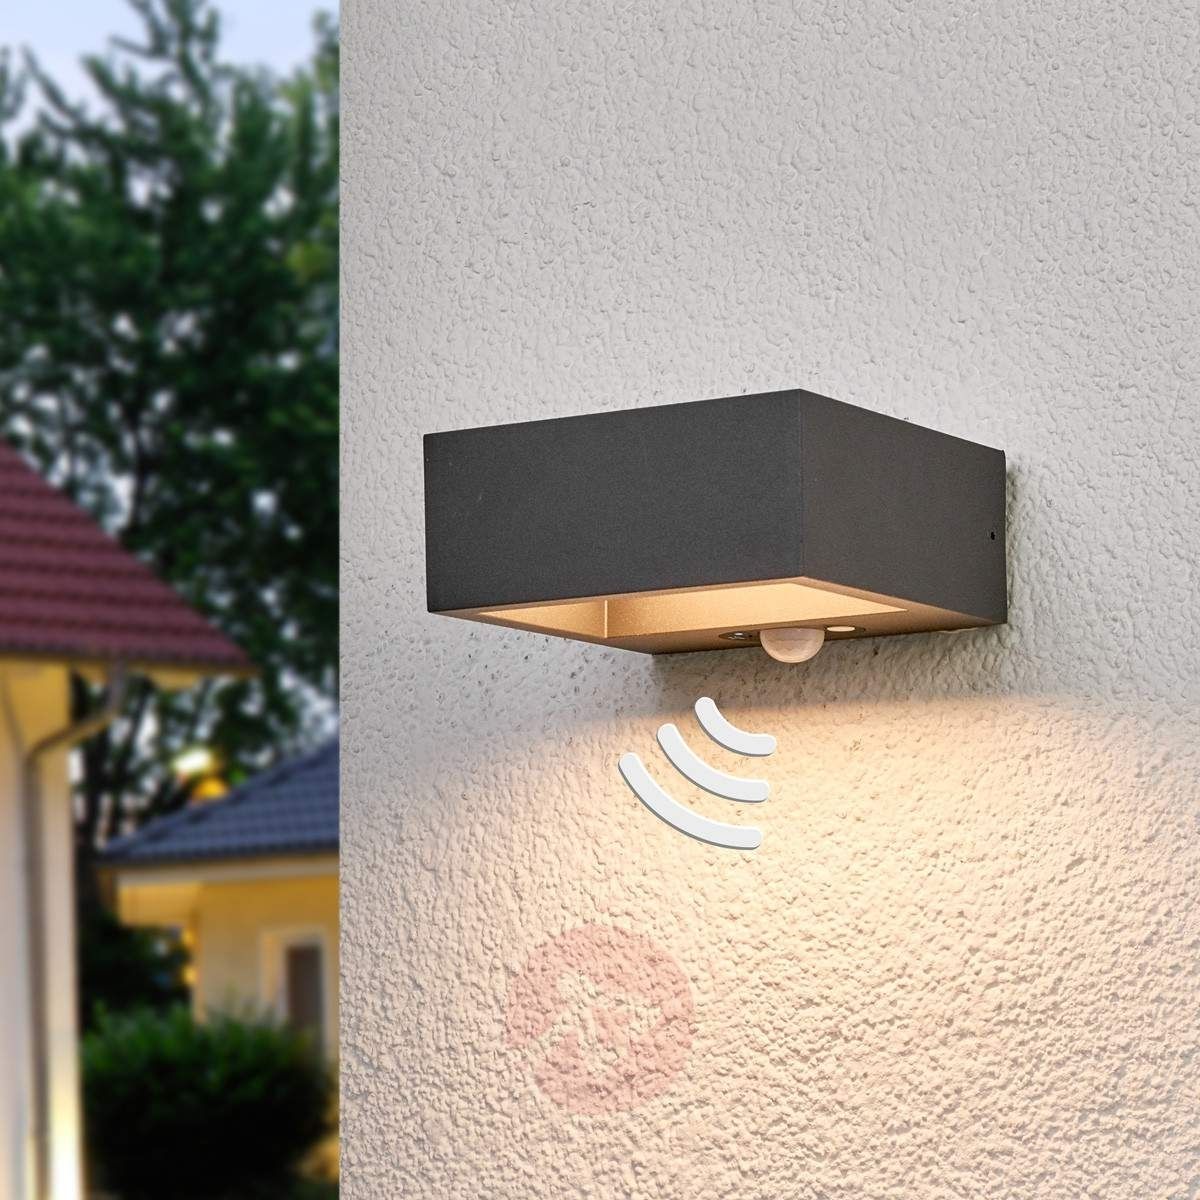 Furniture : Solar Powered Led Outdoor Wall Light Mahra Sensor Black Within Pir Solar Outdoor Wall Lights (View 8 of 15)